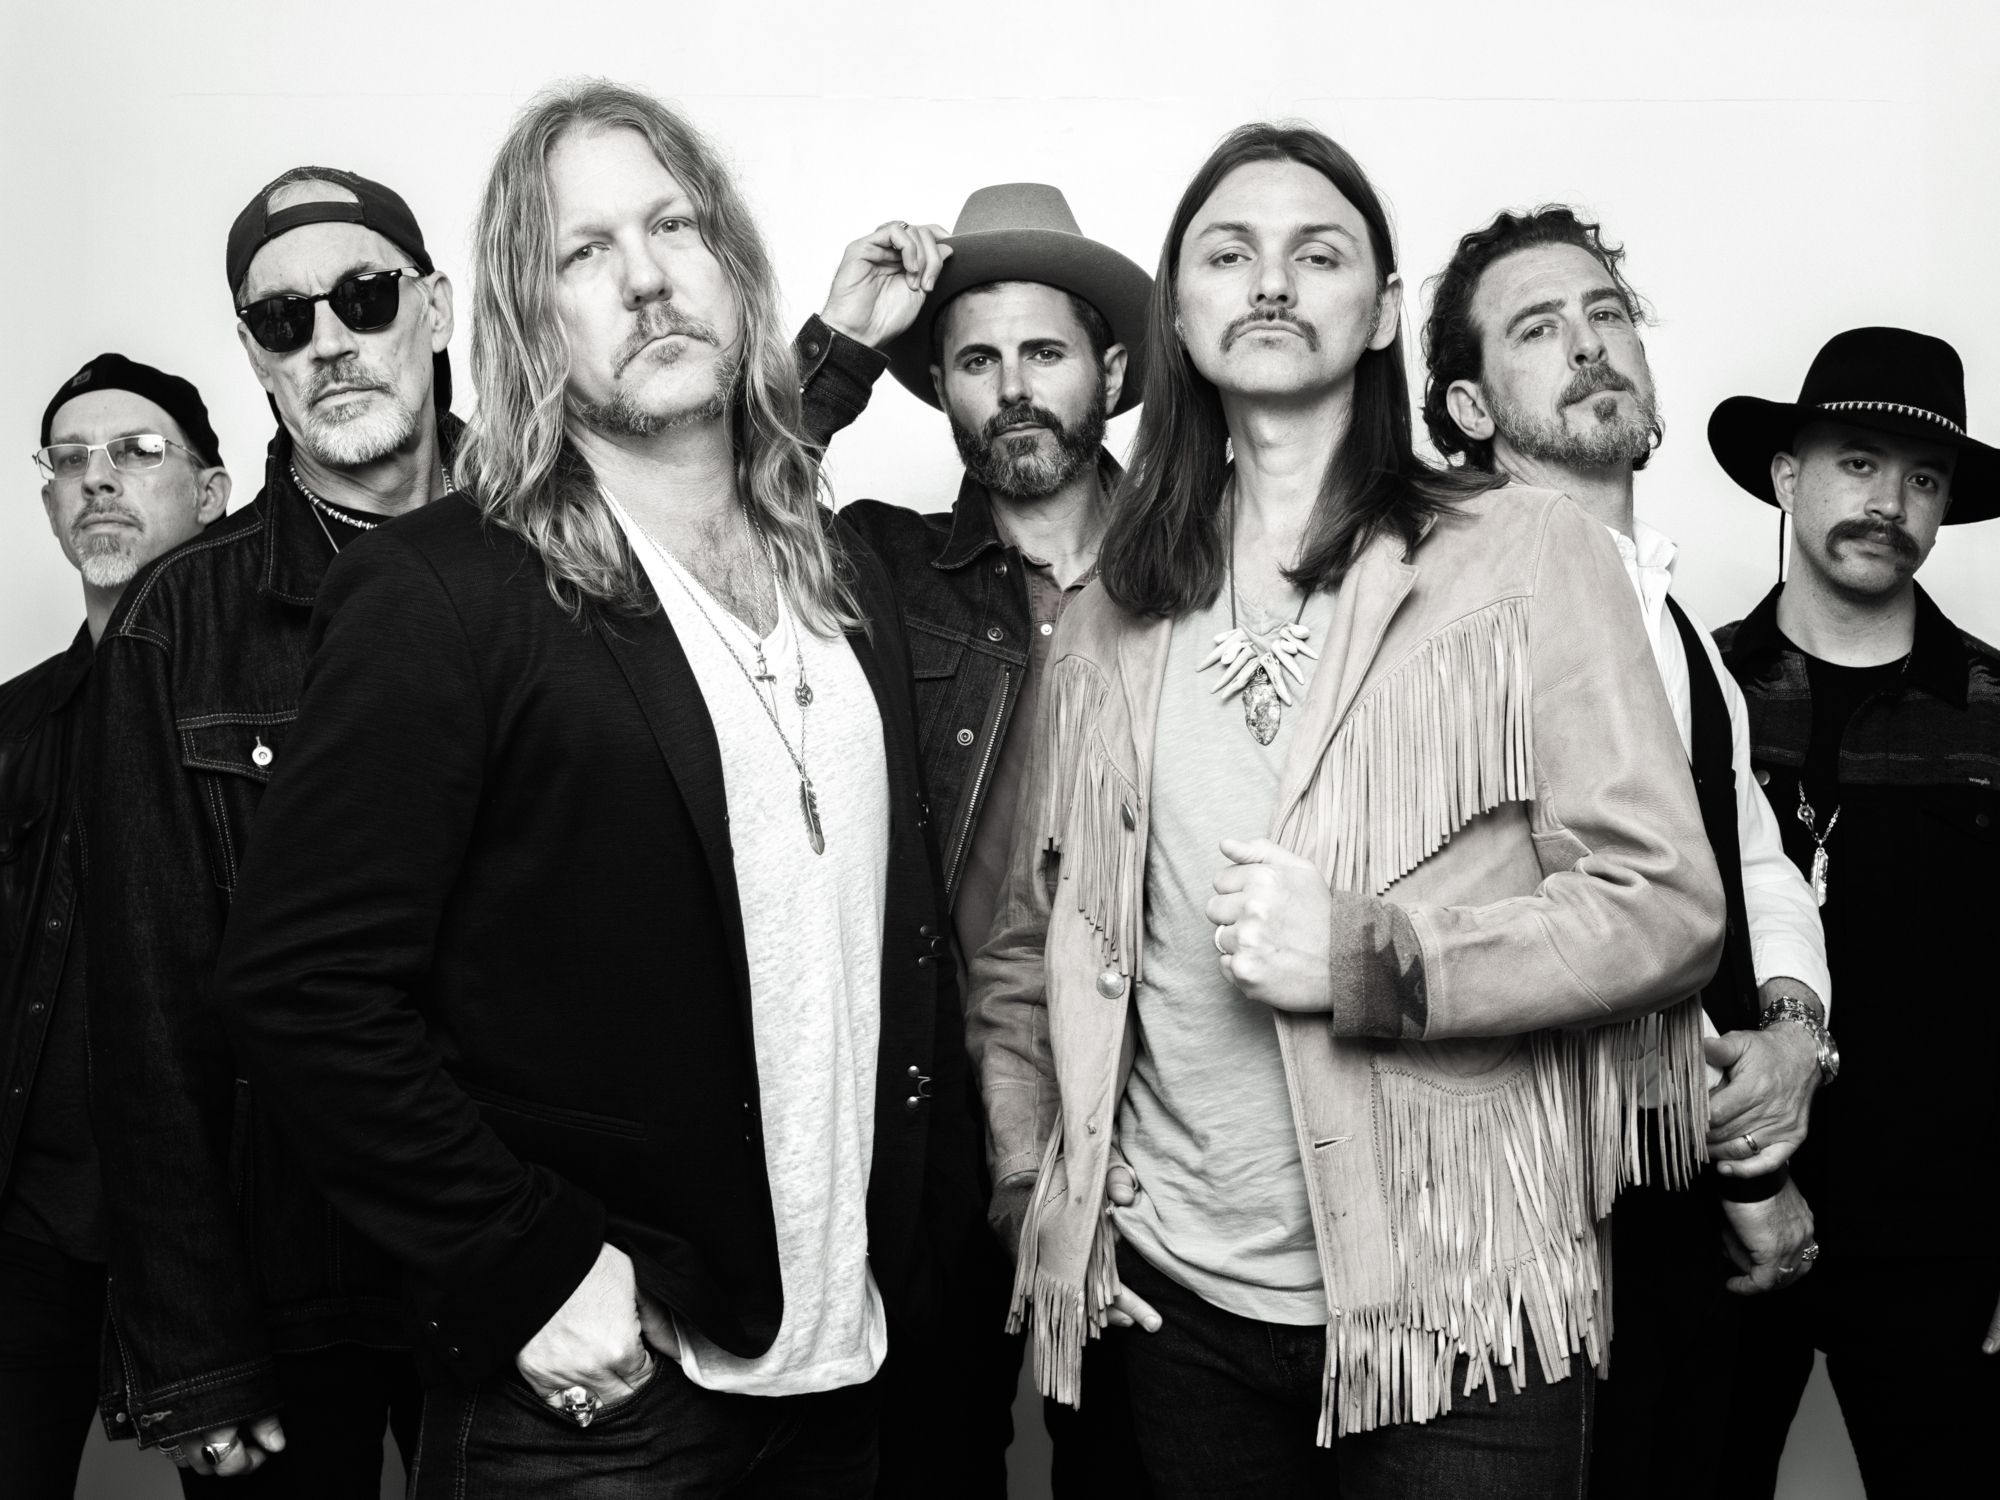 The Allman Betts Band Return For More Southern Roots Rocking With ‘Bless Your Heart’